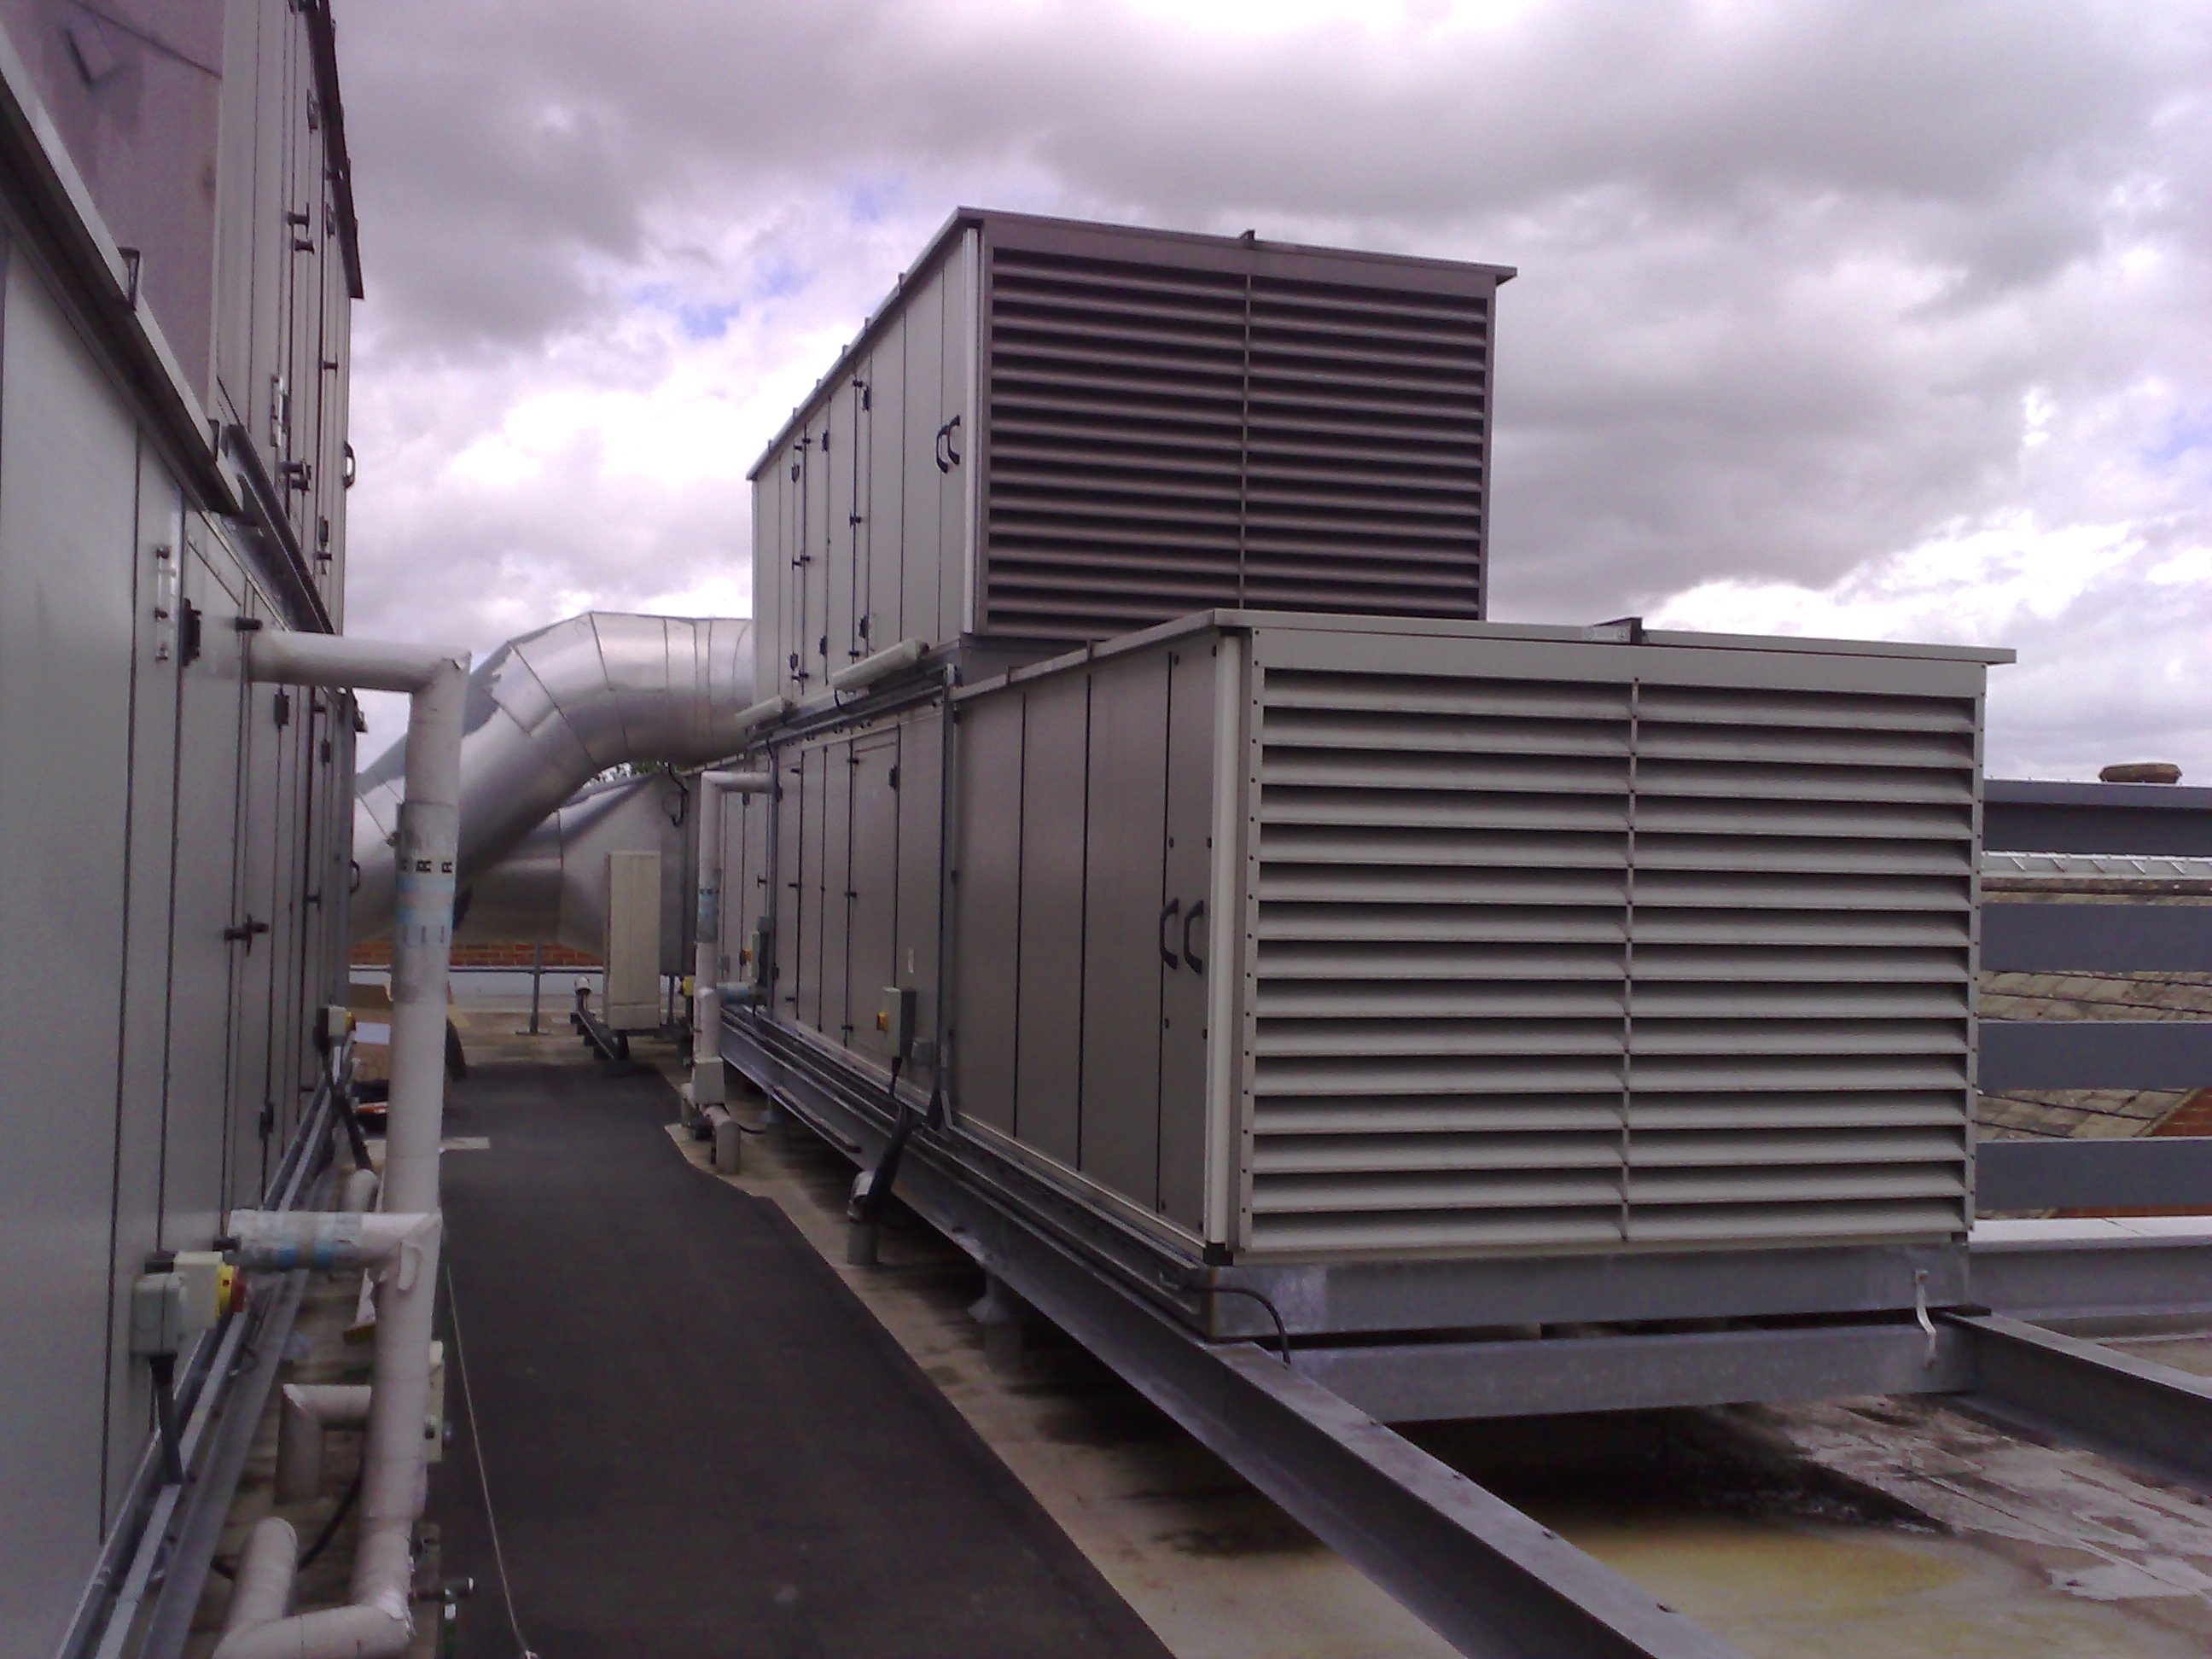 Air conditioning and refrigeration offer an installation and maintenance service